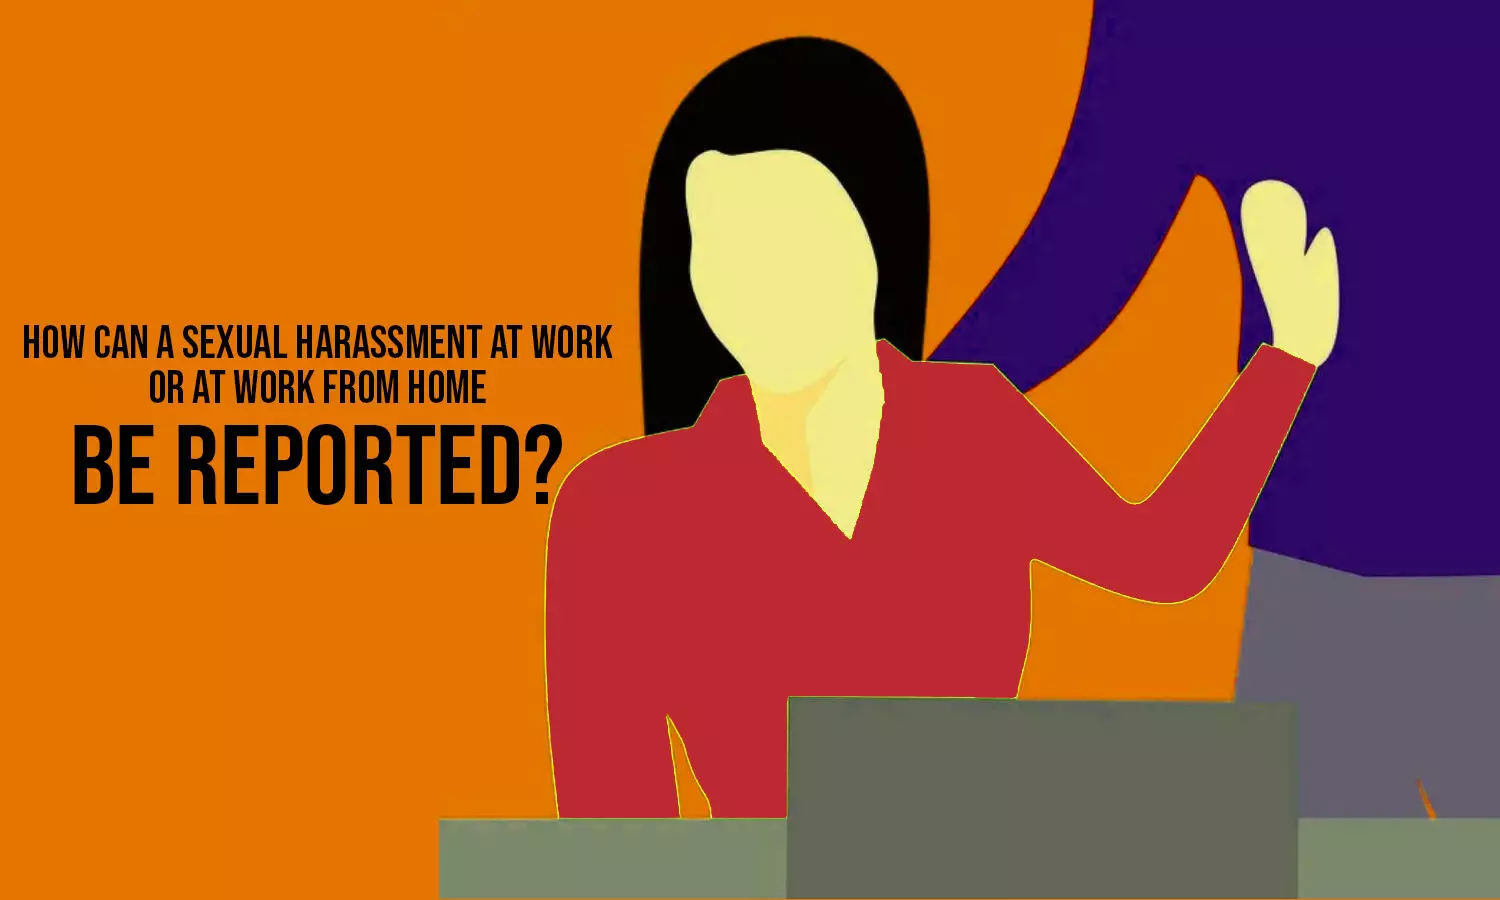 How can a sexual harassment at work or at work from home be reported?